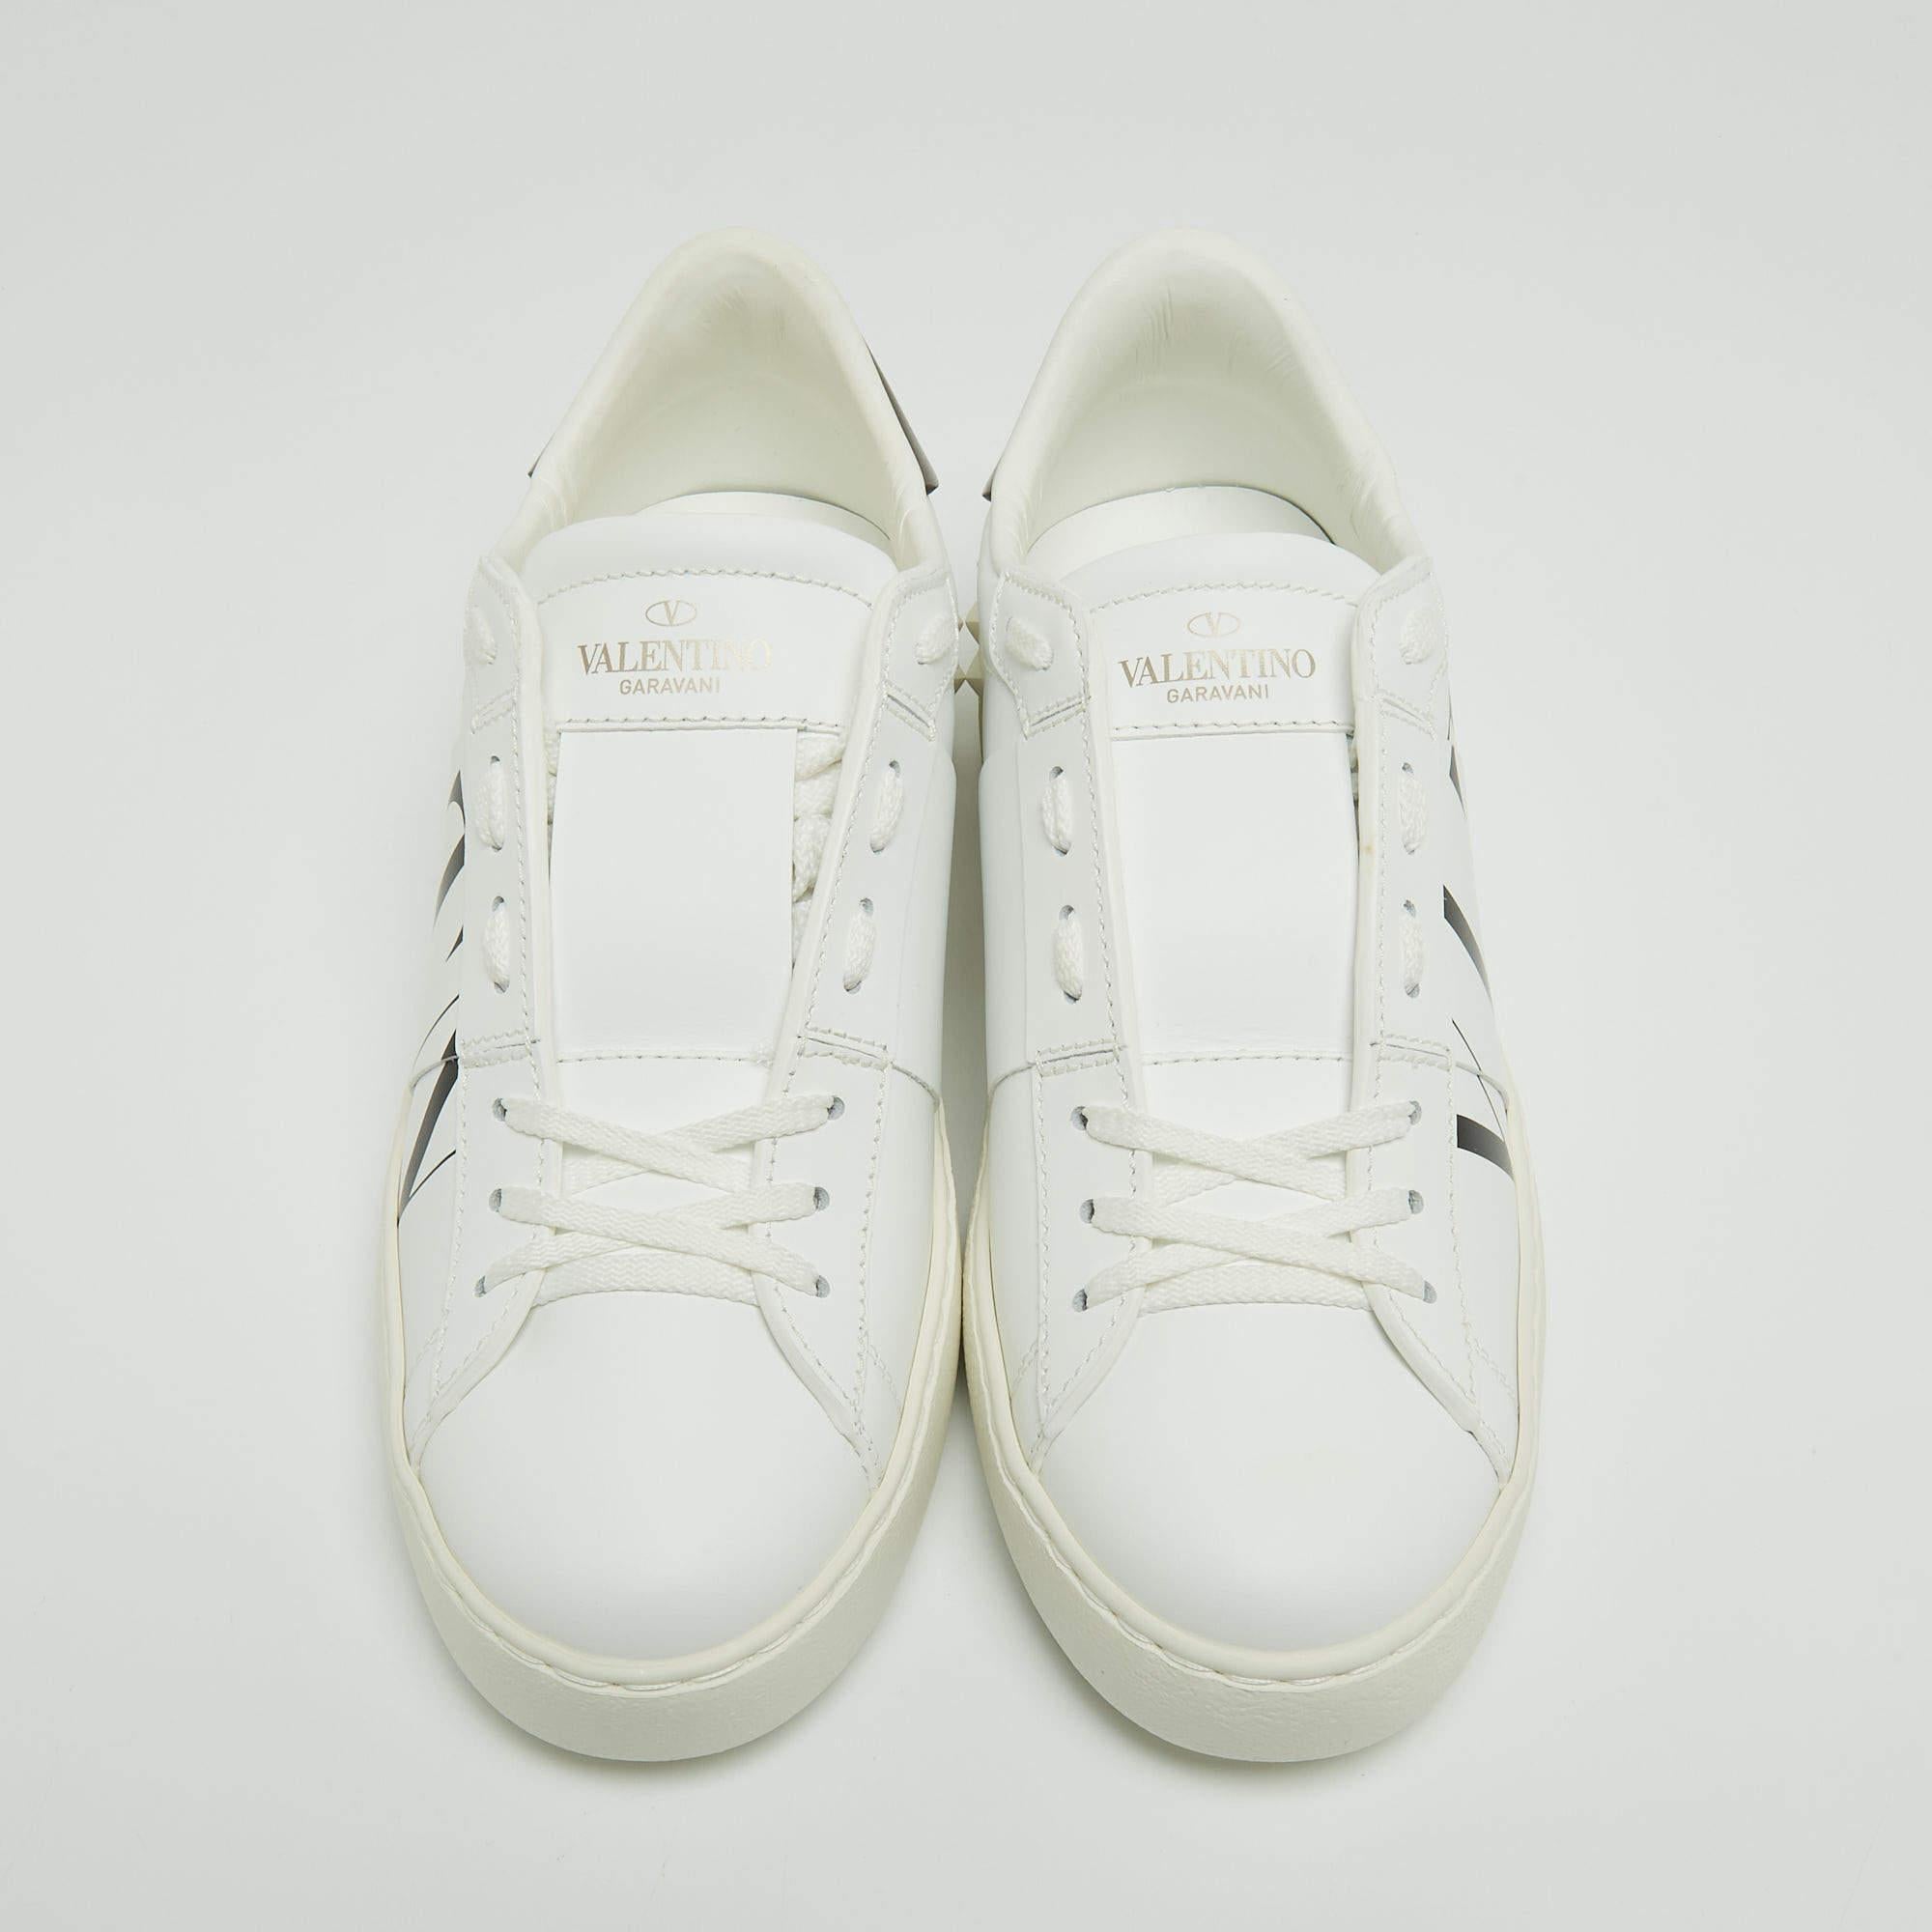 Coming in a classic silhouette, these designer sneakers are a seamless combination of luxury, comfort, and style. These sneakers are finished with signature details and comfortable insoles.

Includes
Original Dustbag, Original Box, Extra Laces, Info